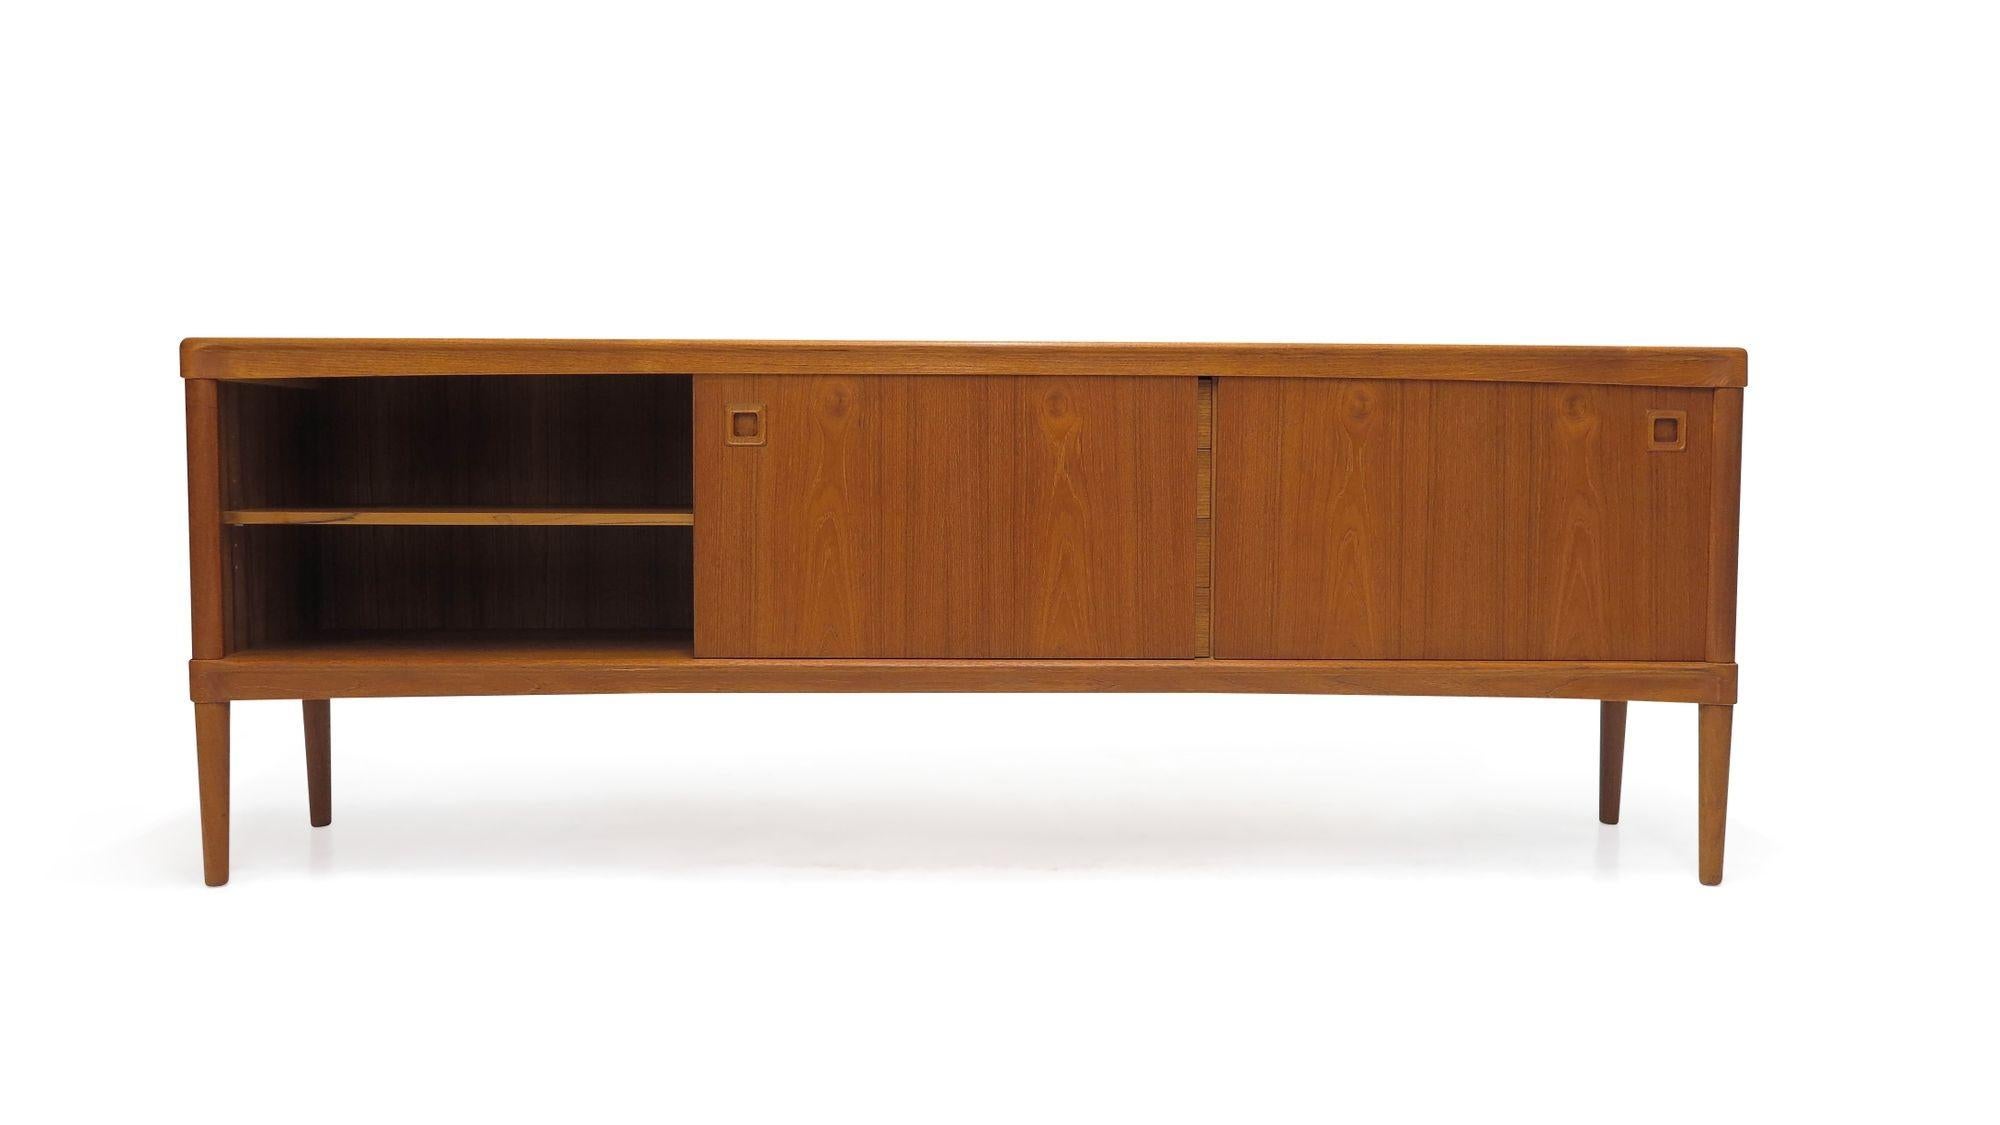 Danish Teak credenza designed by H.W Klein for Bramin Moblefabrik. Finely crafted of teak with book-matched grain and recessed square pulls. The cabinet has two sliding doors revealing an interior with adjustable shelves, and four drawers in center.